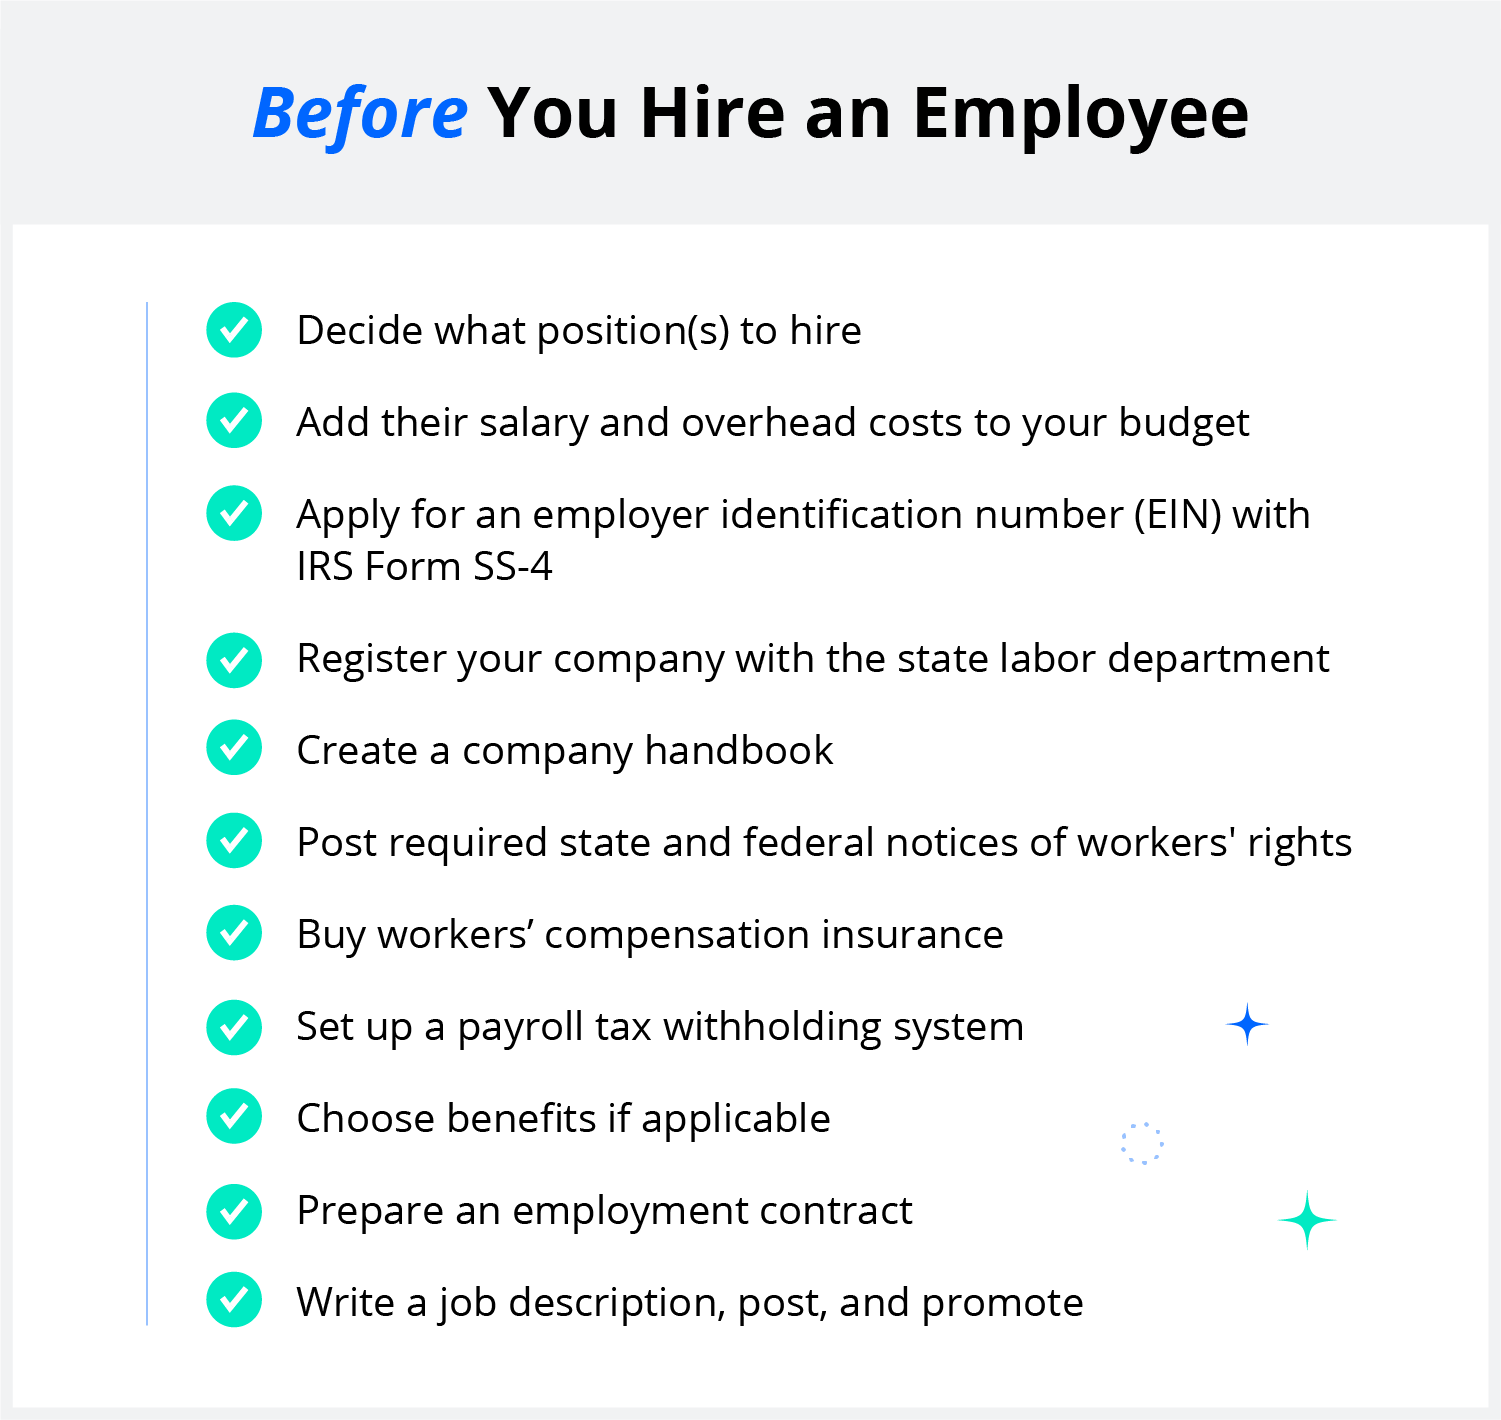 Do Employer Need to Pay via Hired?